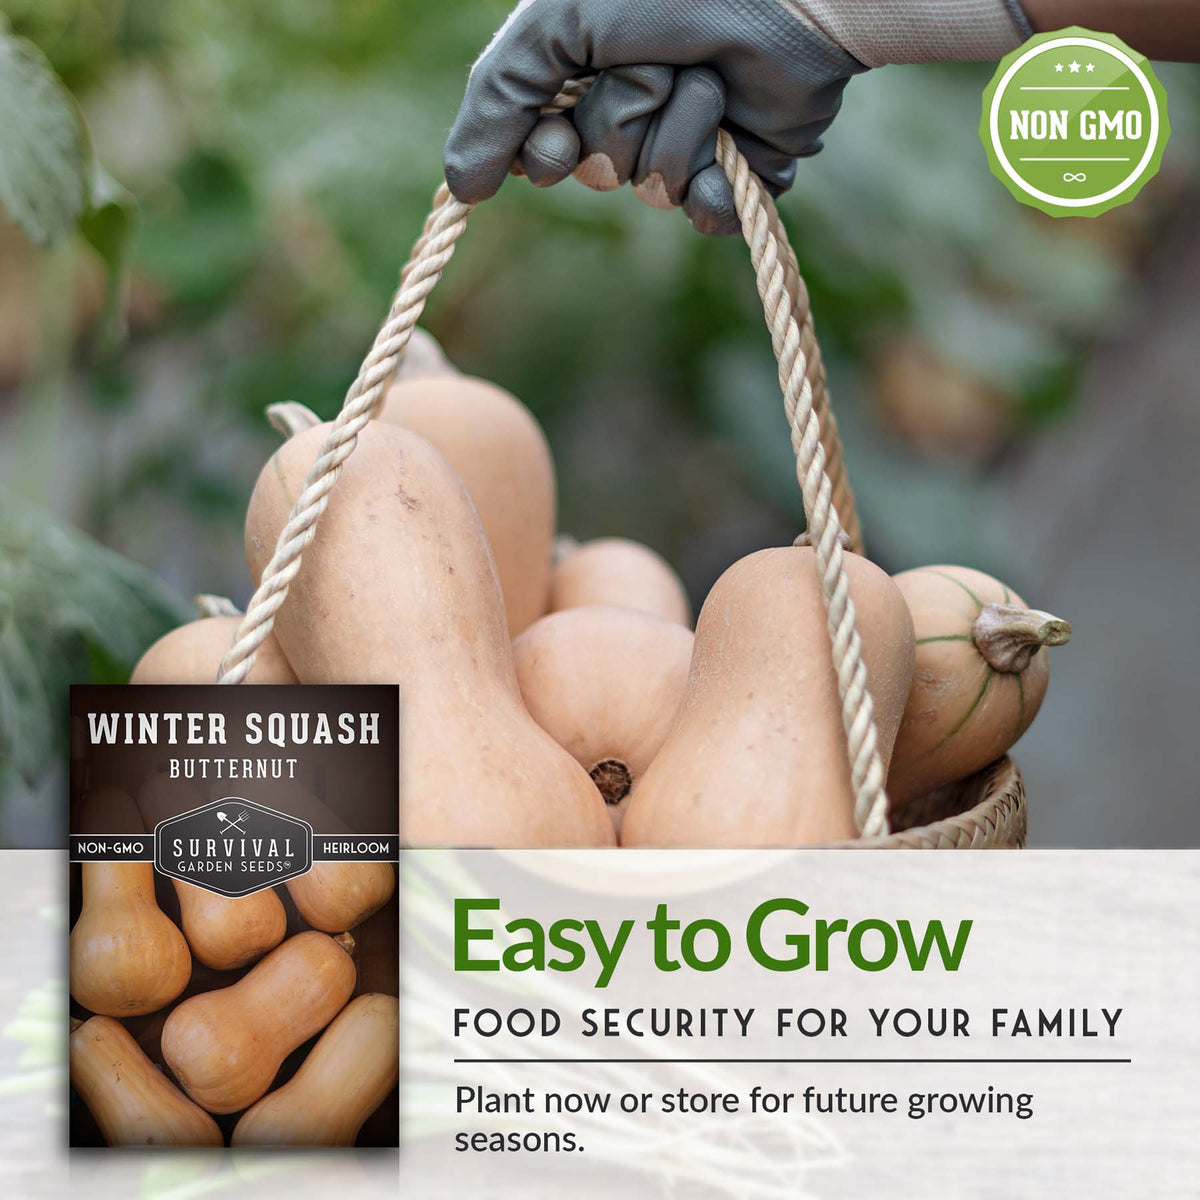 Butternut squash is easy to grow